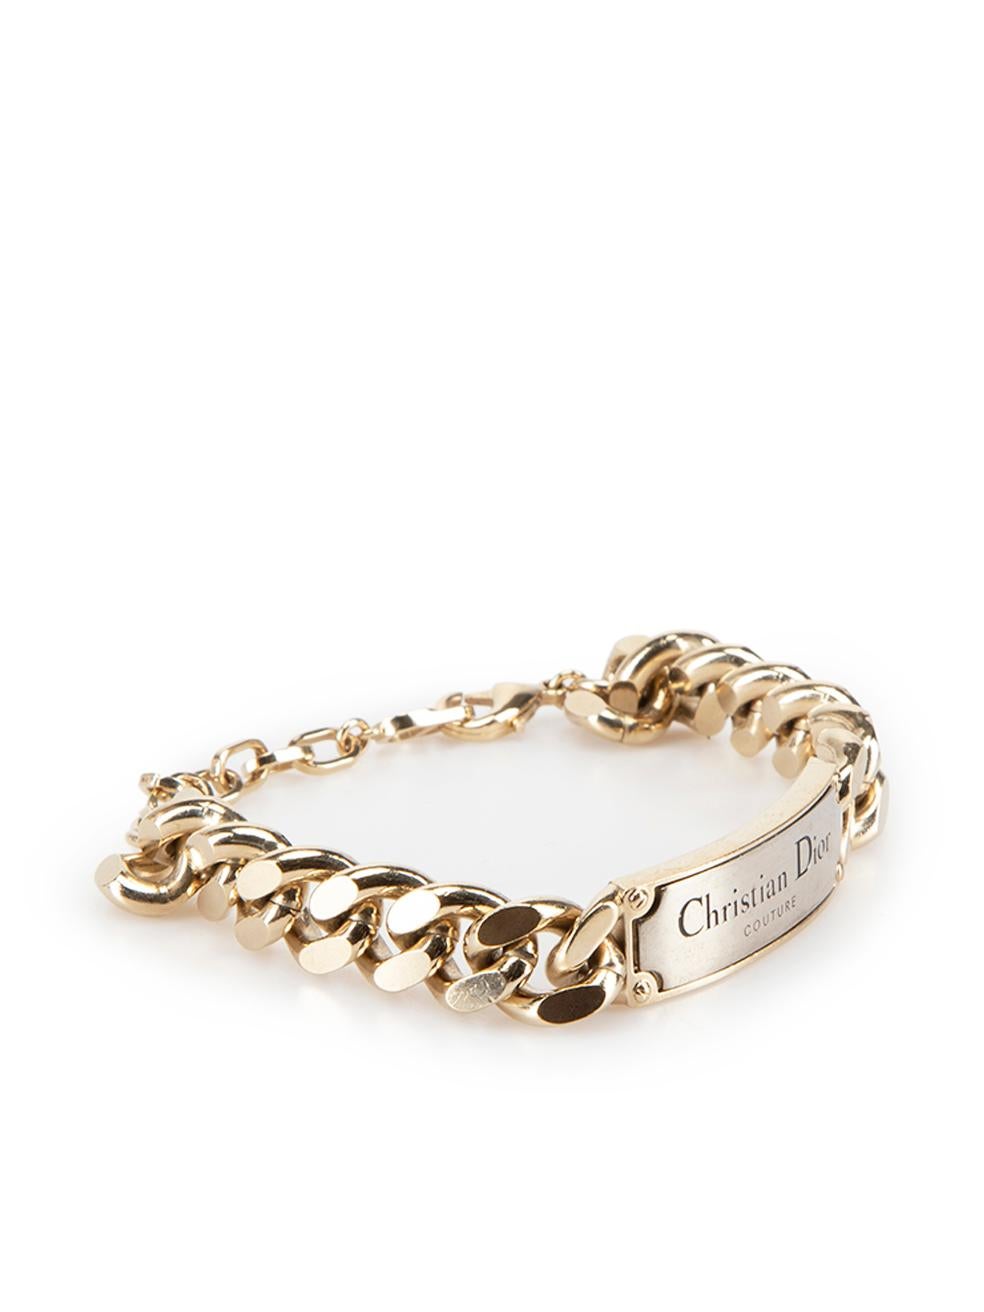 CONDITION is Good. Minor wear to bracelets is evident. Light wear to coated surface with scratches and mild tarnishing throughout on this used Christian Dior Couture designer resale item.



Details


Gold

Metal

Bracelet

Lobster clasp

Chain